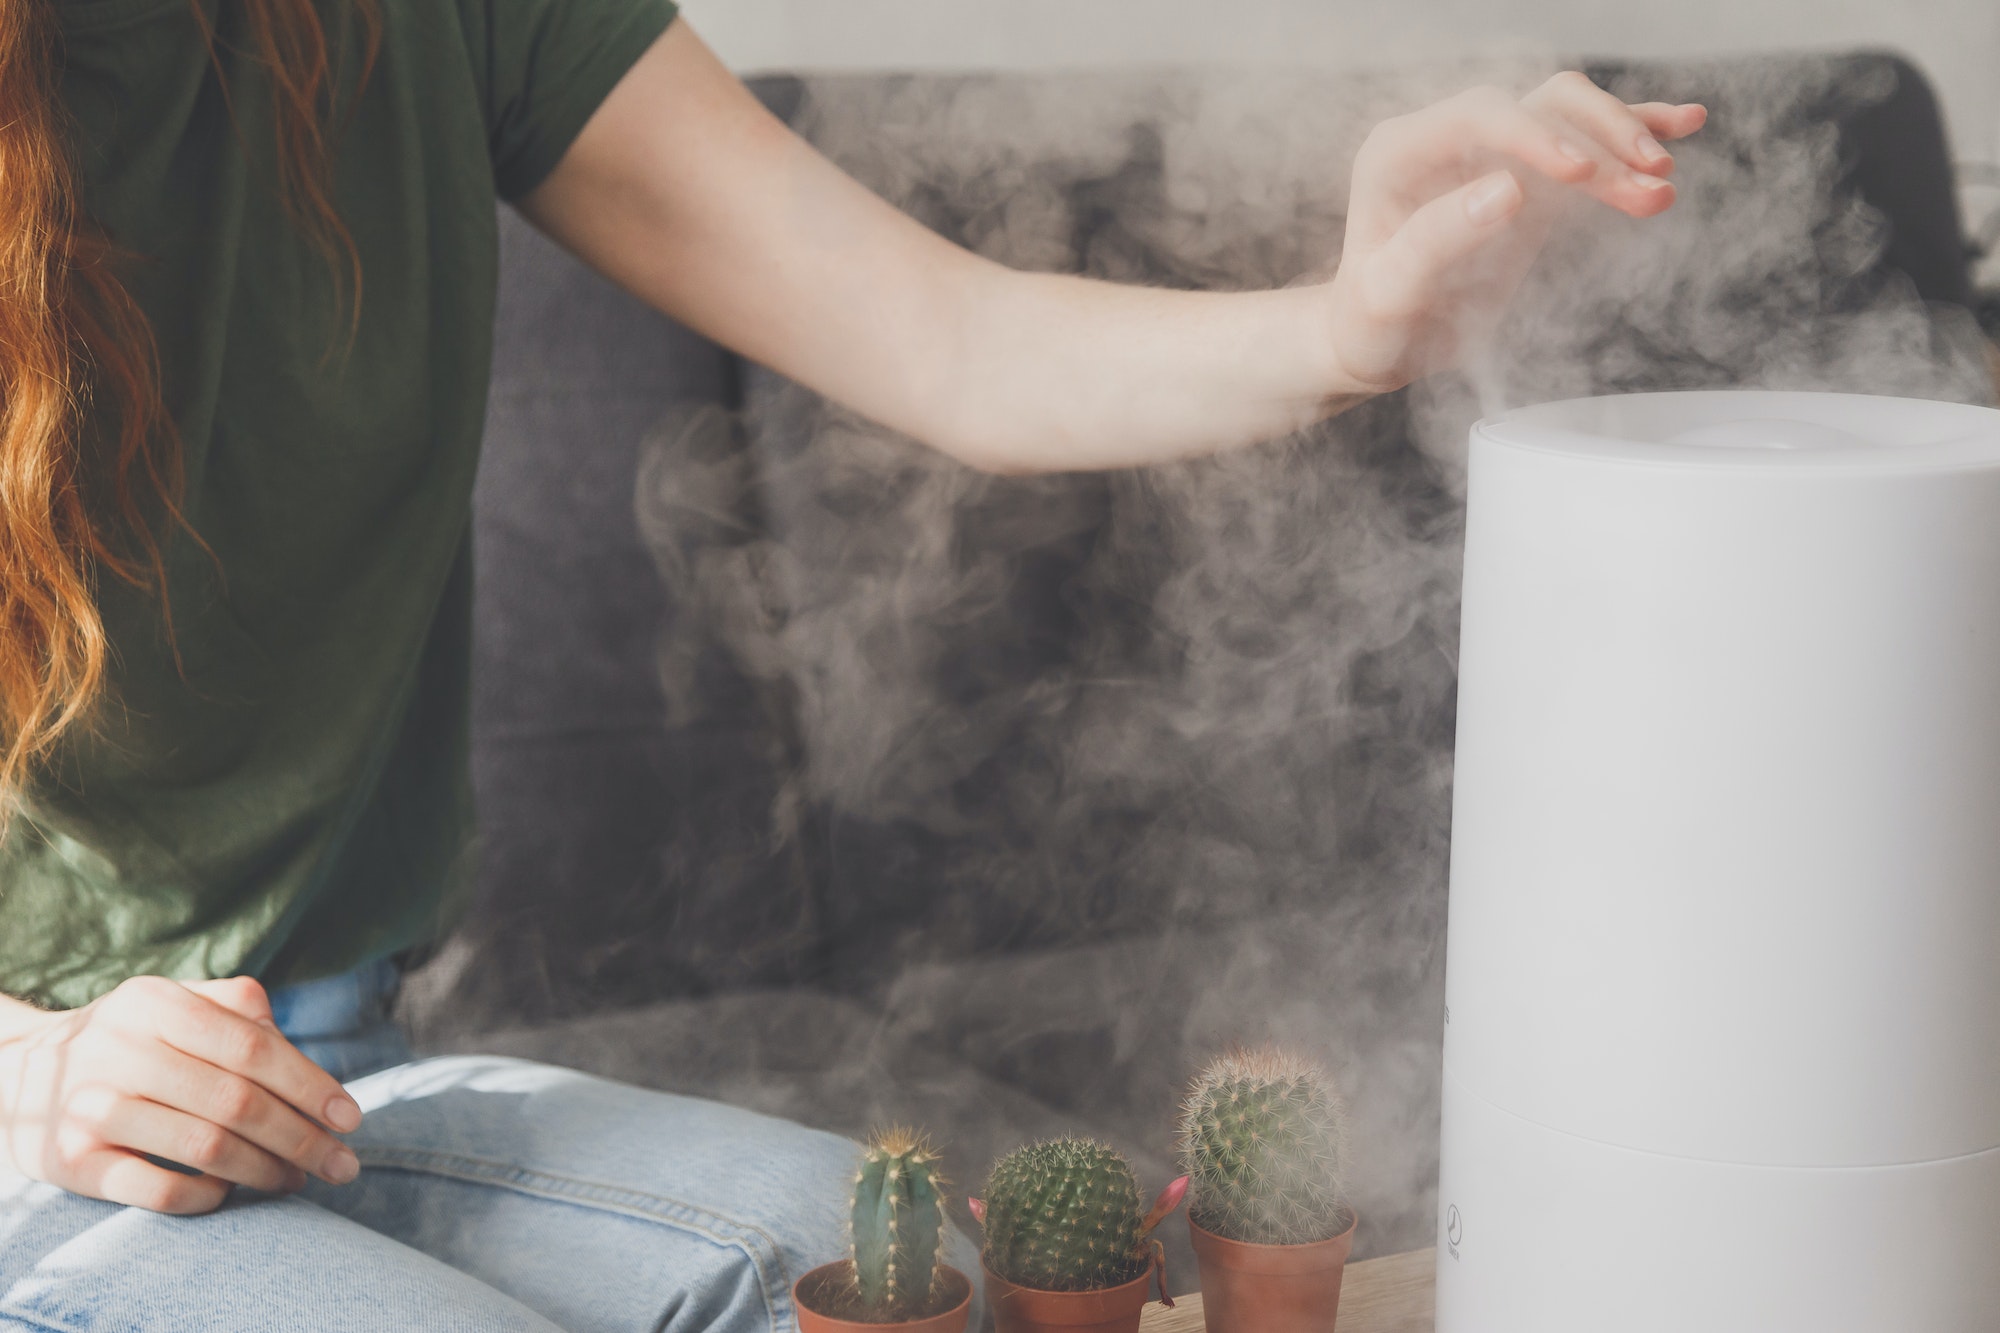 Healthy air. The humidifier distributes steam in the living room. Woman keeps hand over vapor